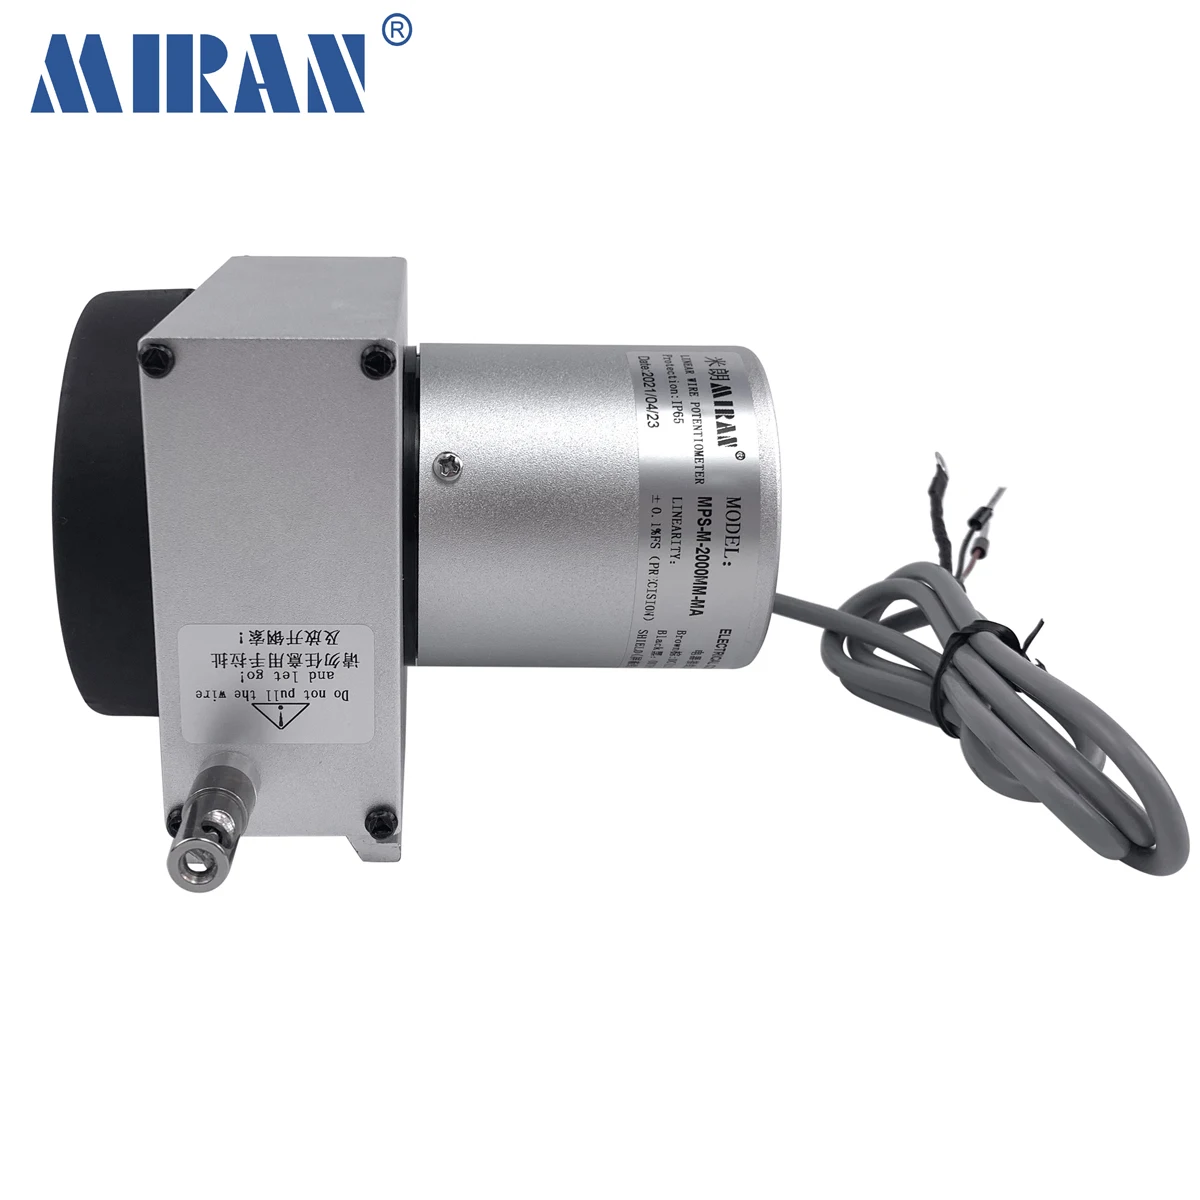 

MIRAN MPS-M-MA Two Wires Linear Scale 1500-4000mm Absolute Encoder Potentiometer Wire Draw Encoder Linear Position Sensors